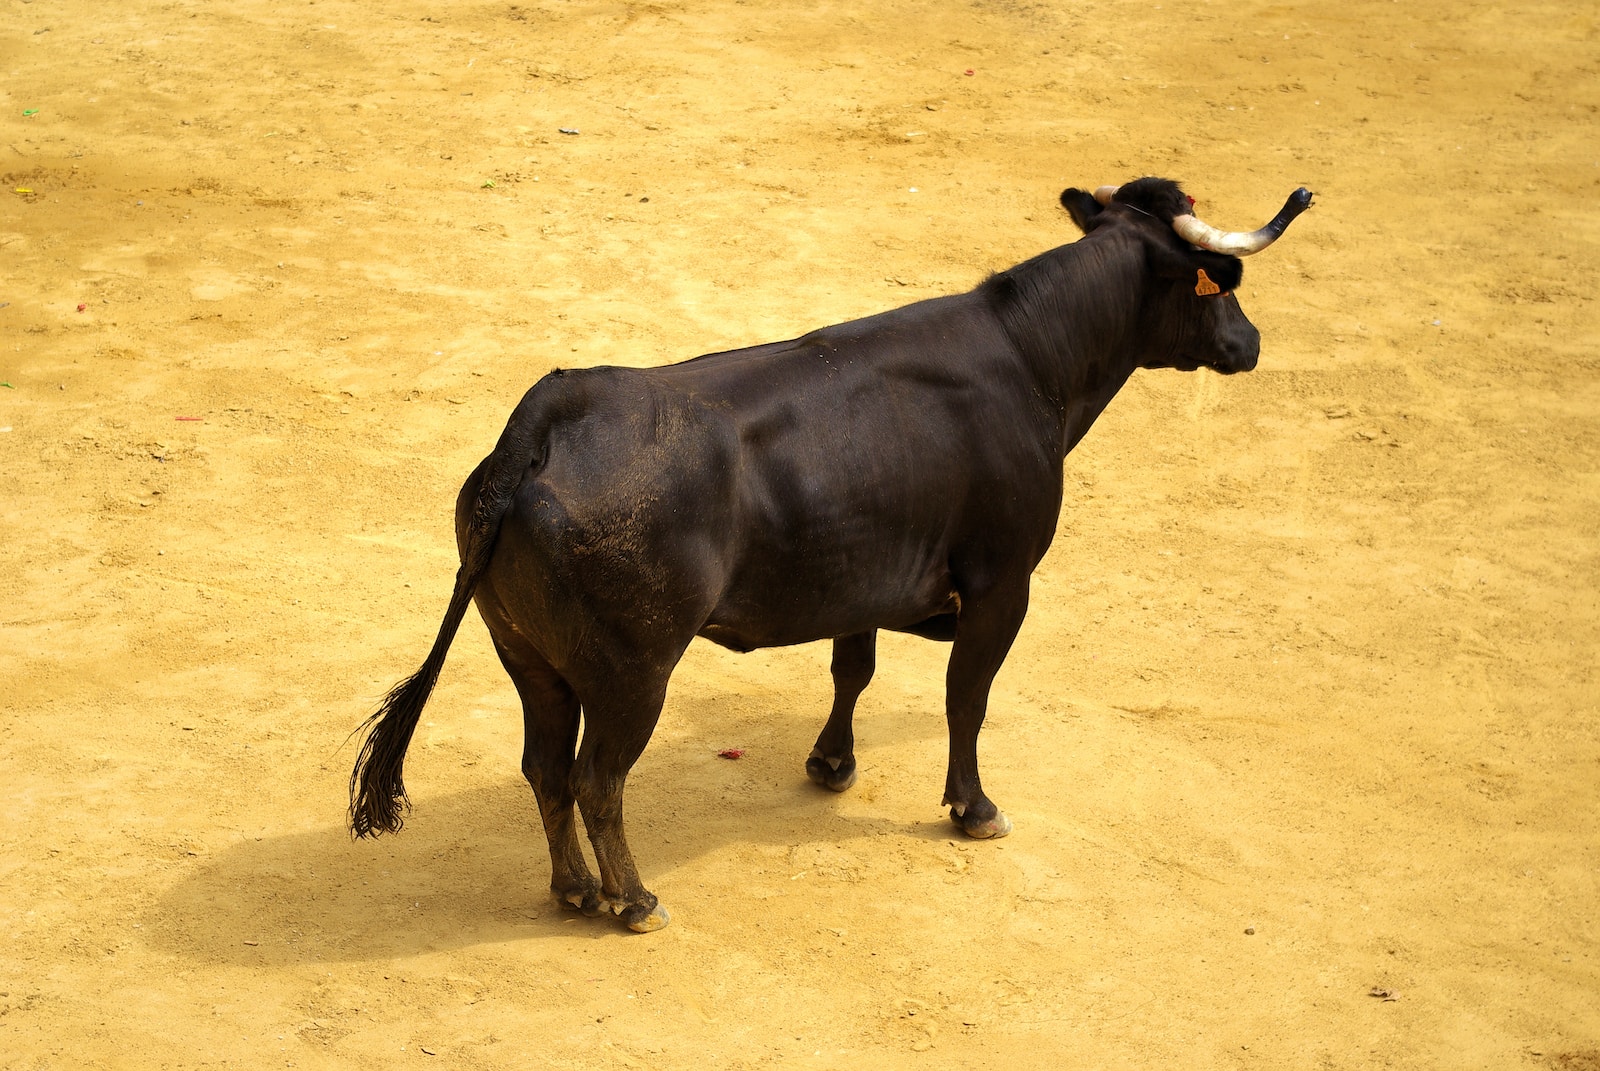 a bull standing in a sandy area